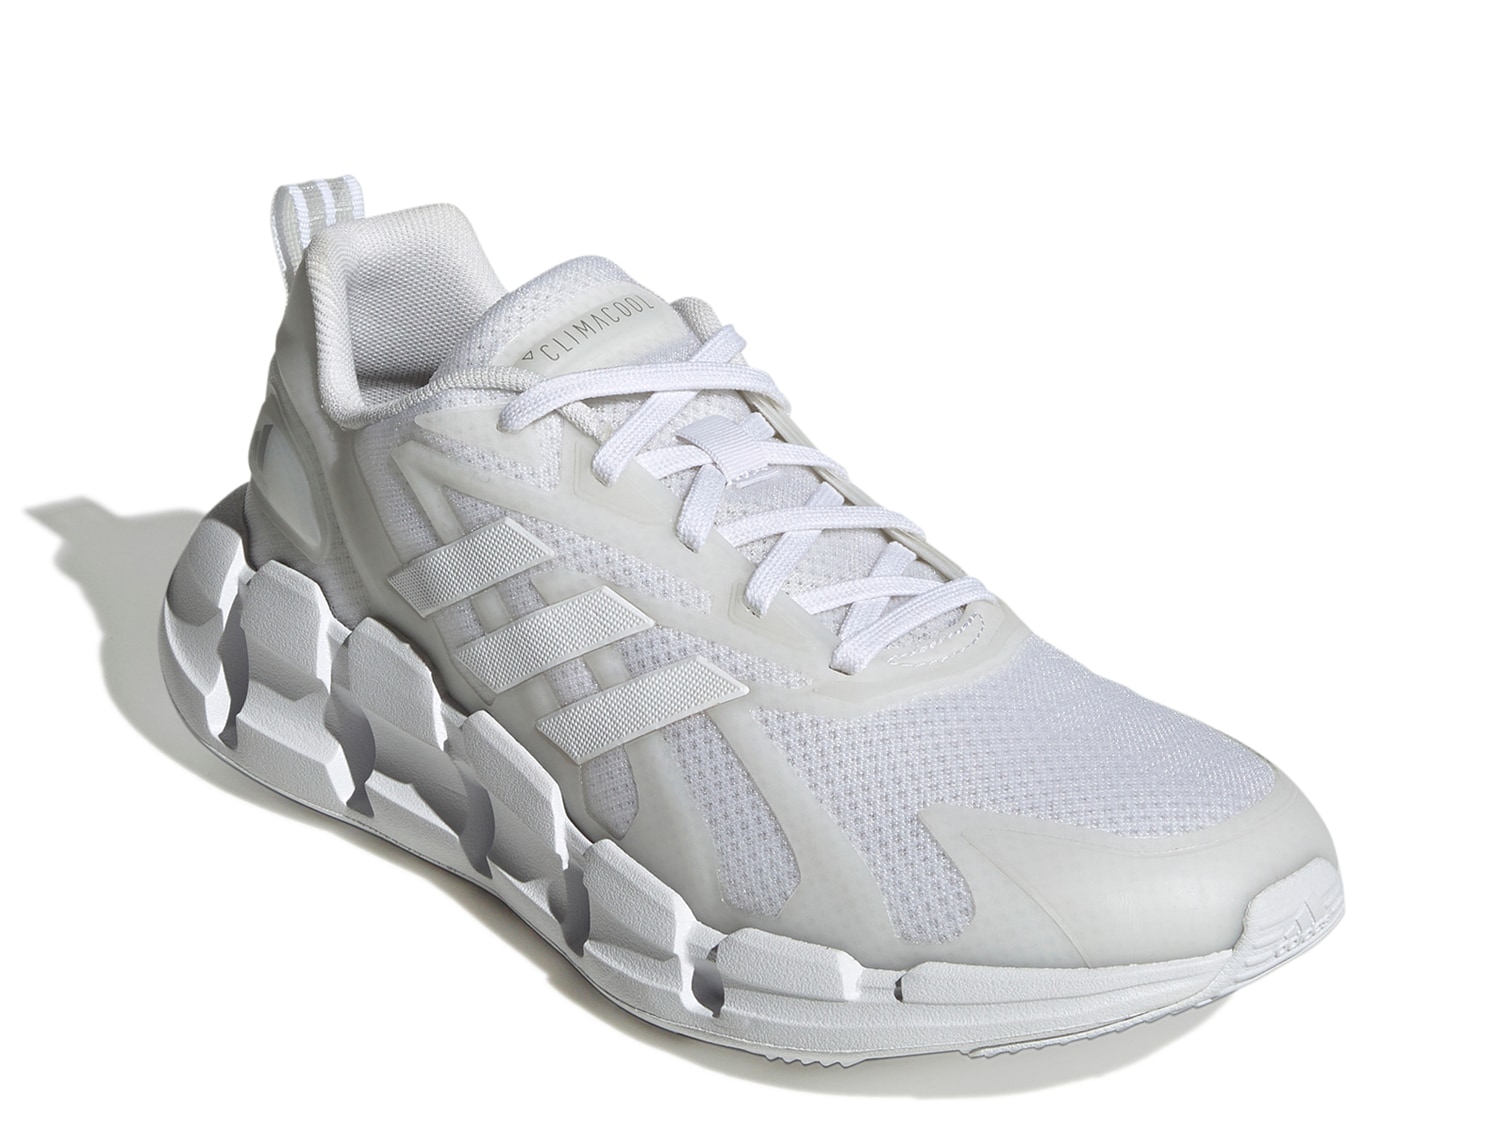 adidas Ventice Climacool Running Shoe - Men's - Free Shipping